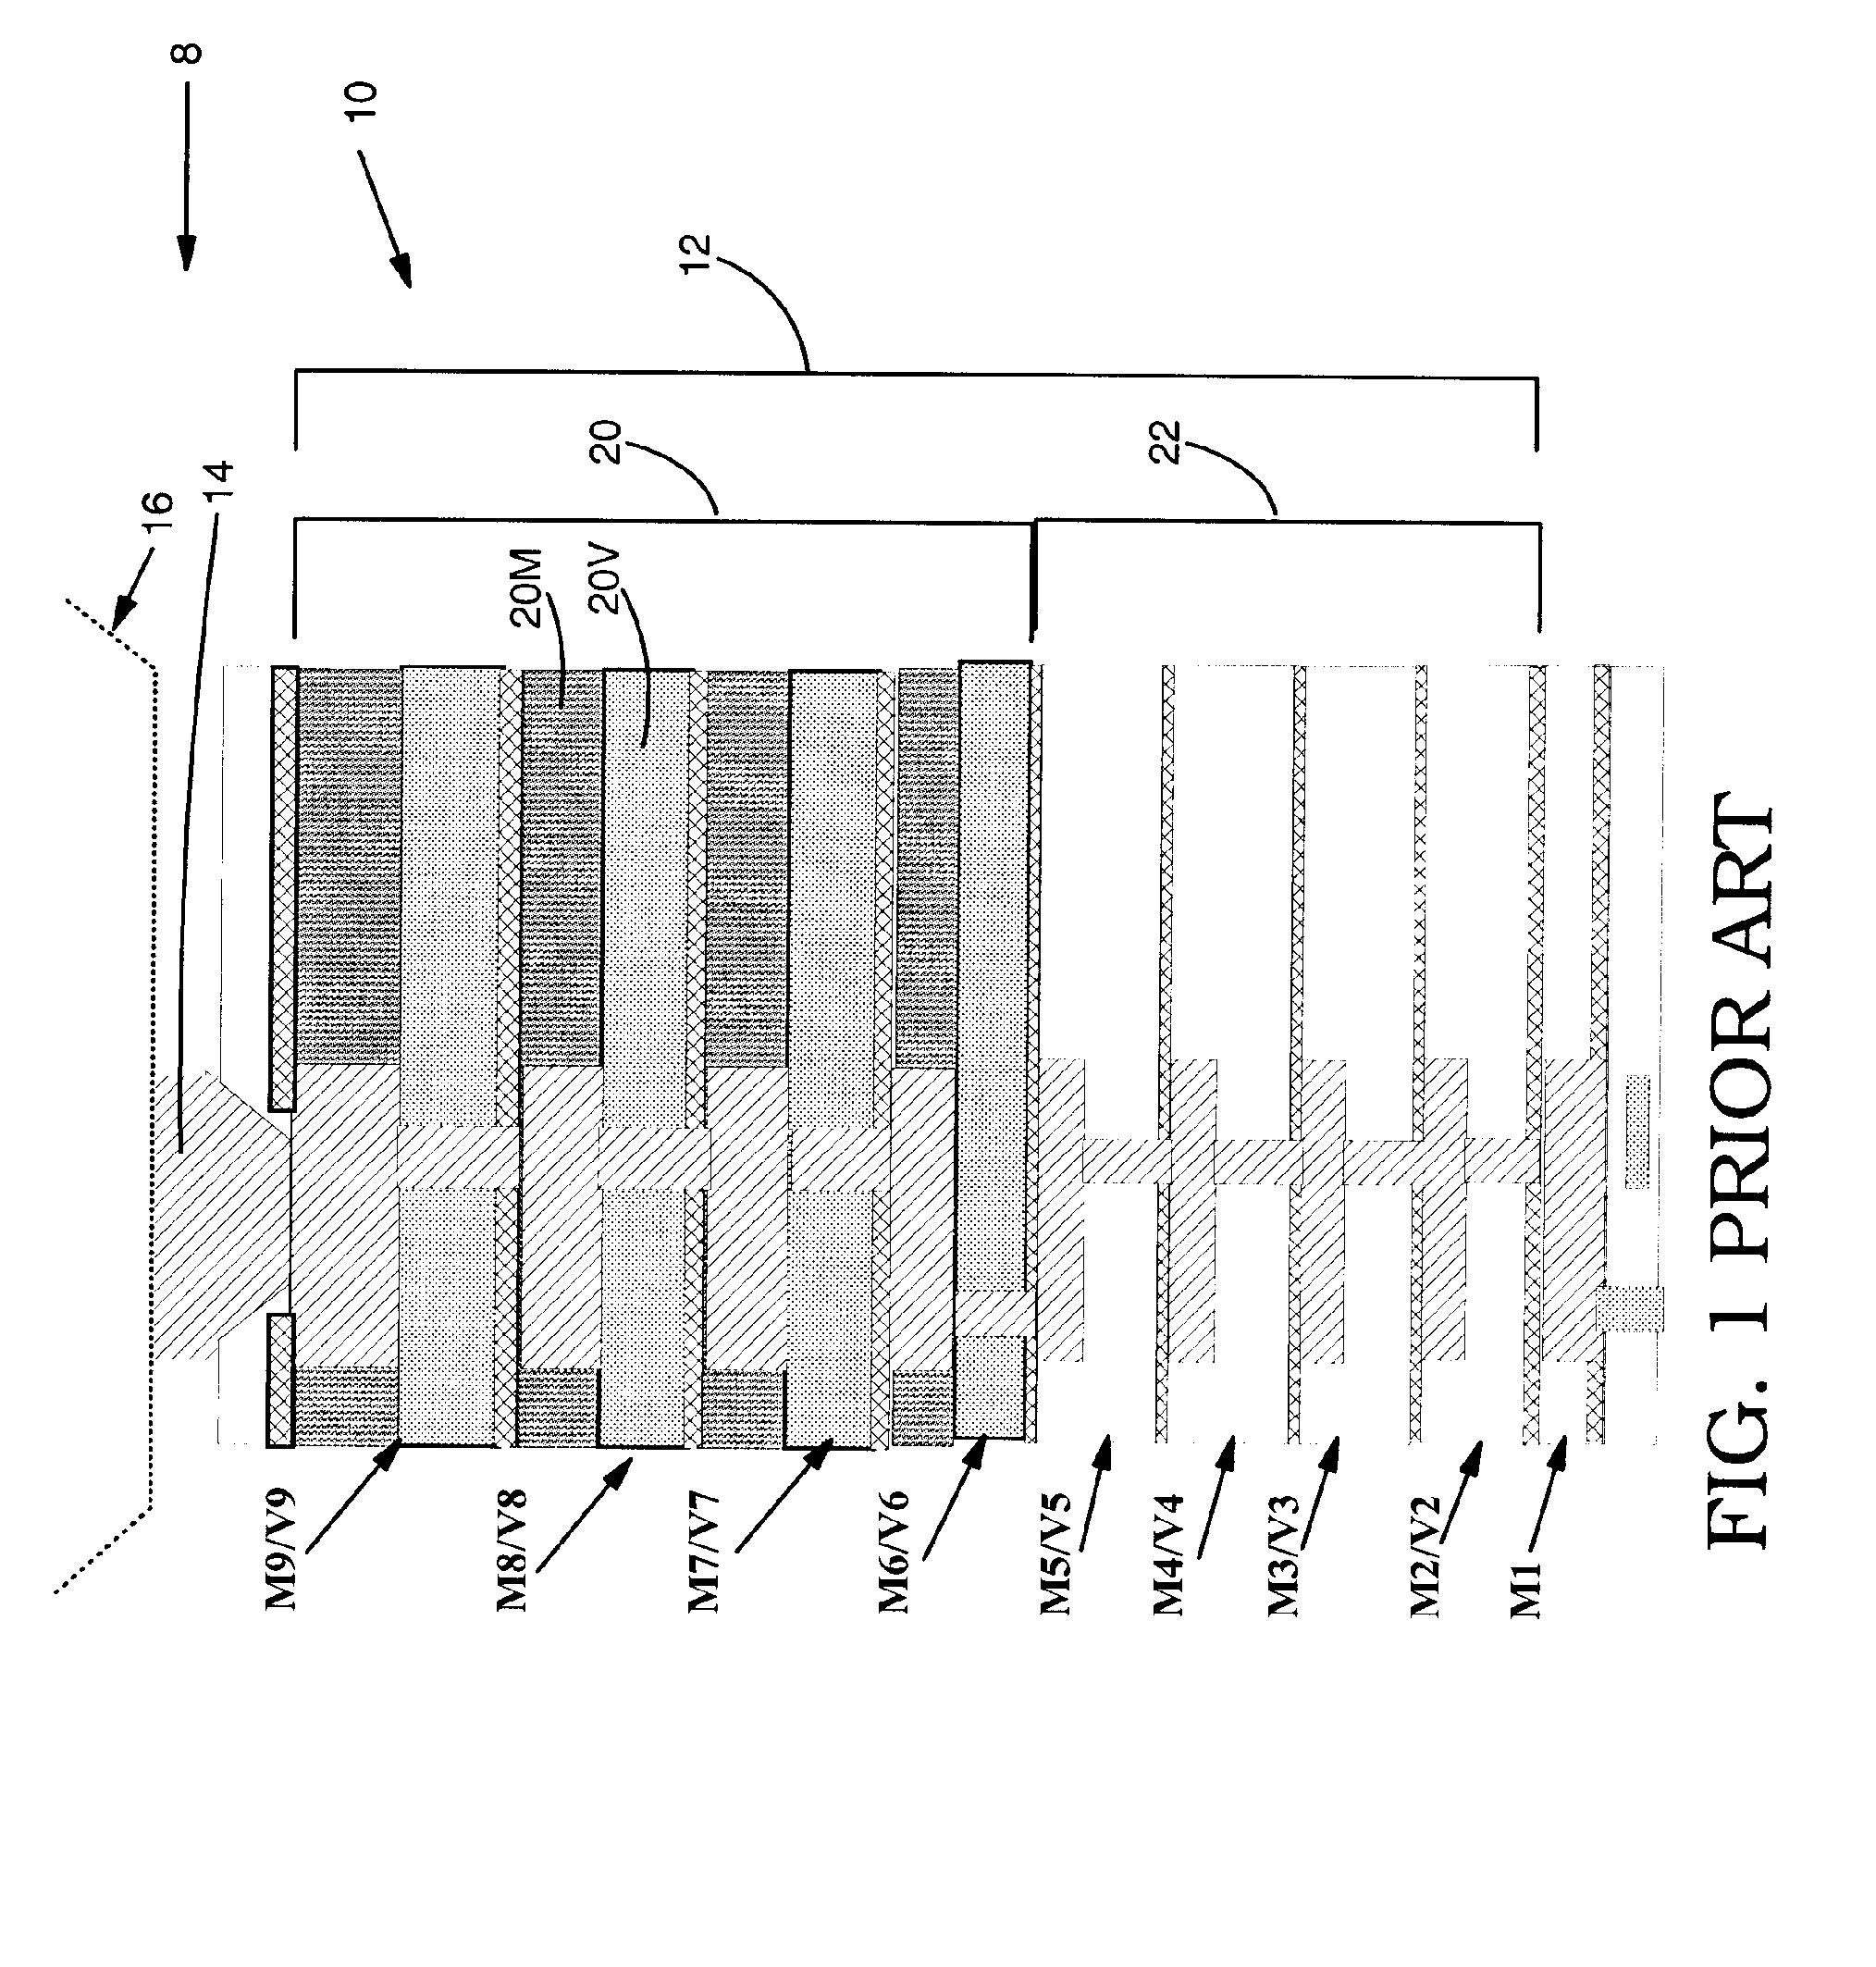 Ild layer with intermediate dielectric constant material immediately below silicon dioxide based ild layer